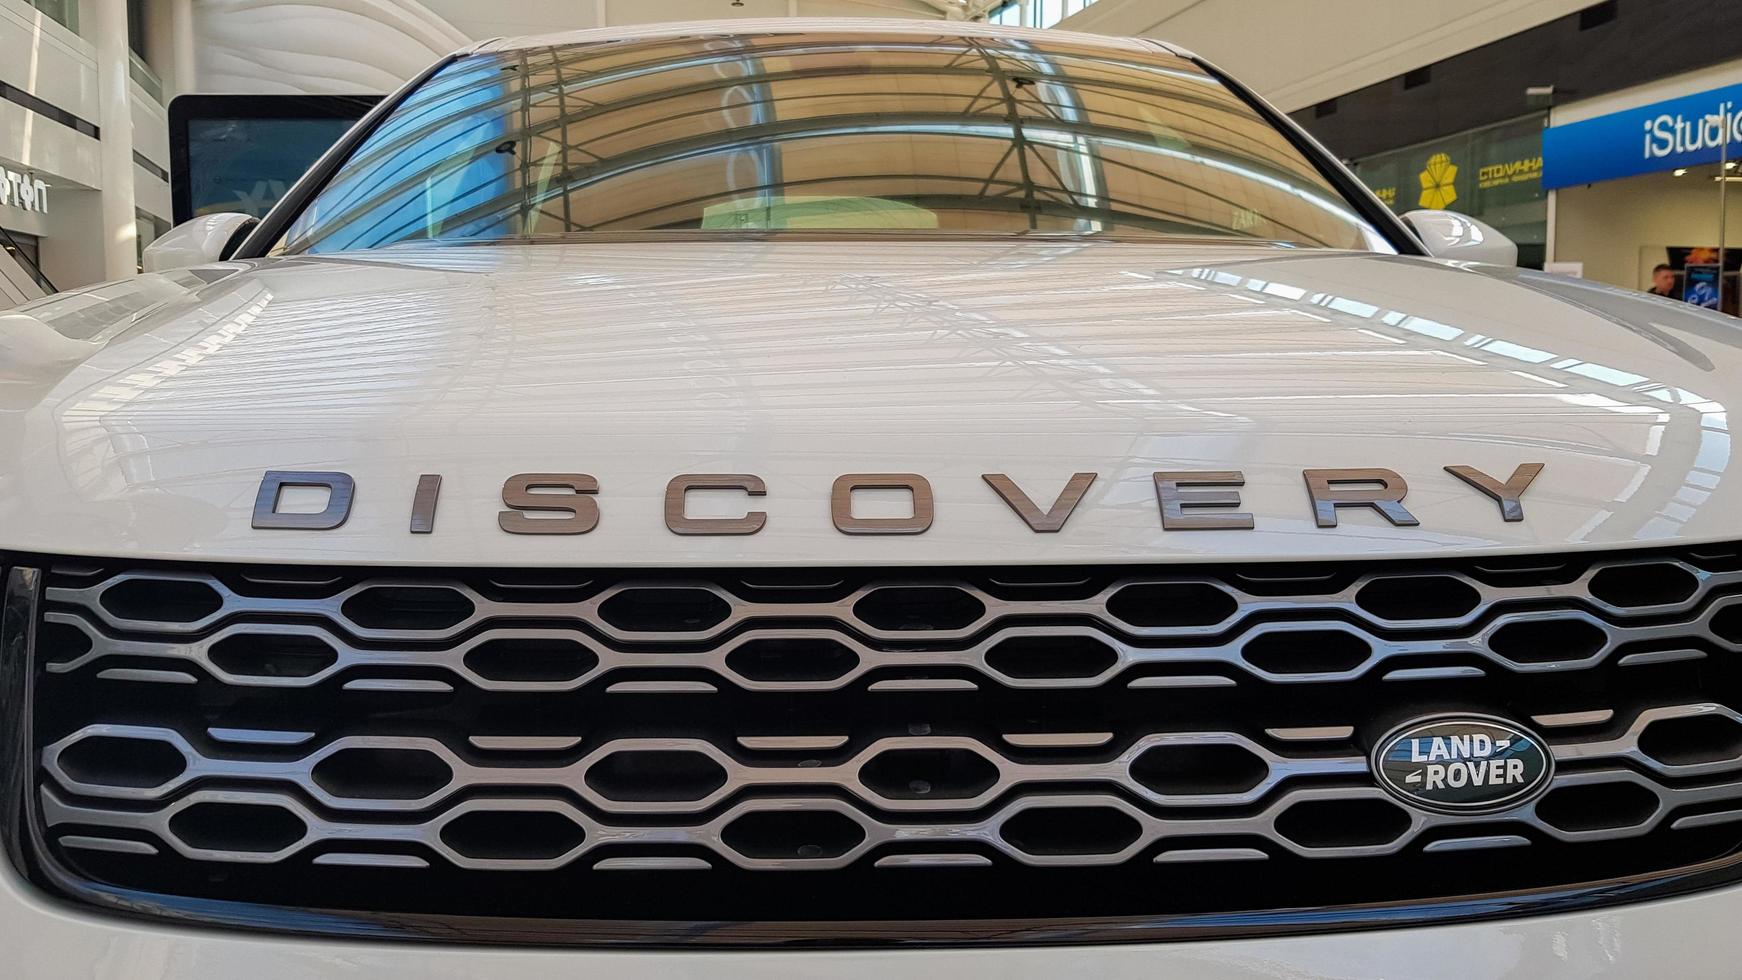 Ukraine, Kiev - March 27, 2020. Land Rover Discovery Sport shiny modern white car at the exhibition. Body, headlights close-up, rear and front view, chrome grille, car logo. photo